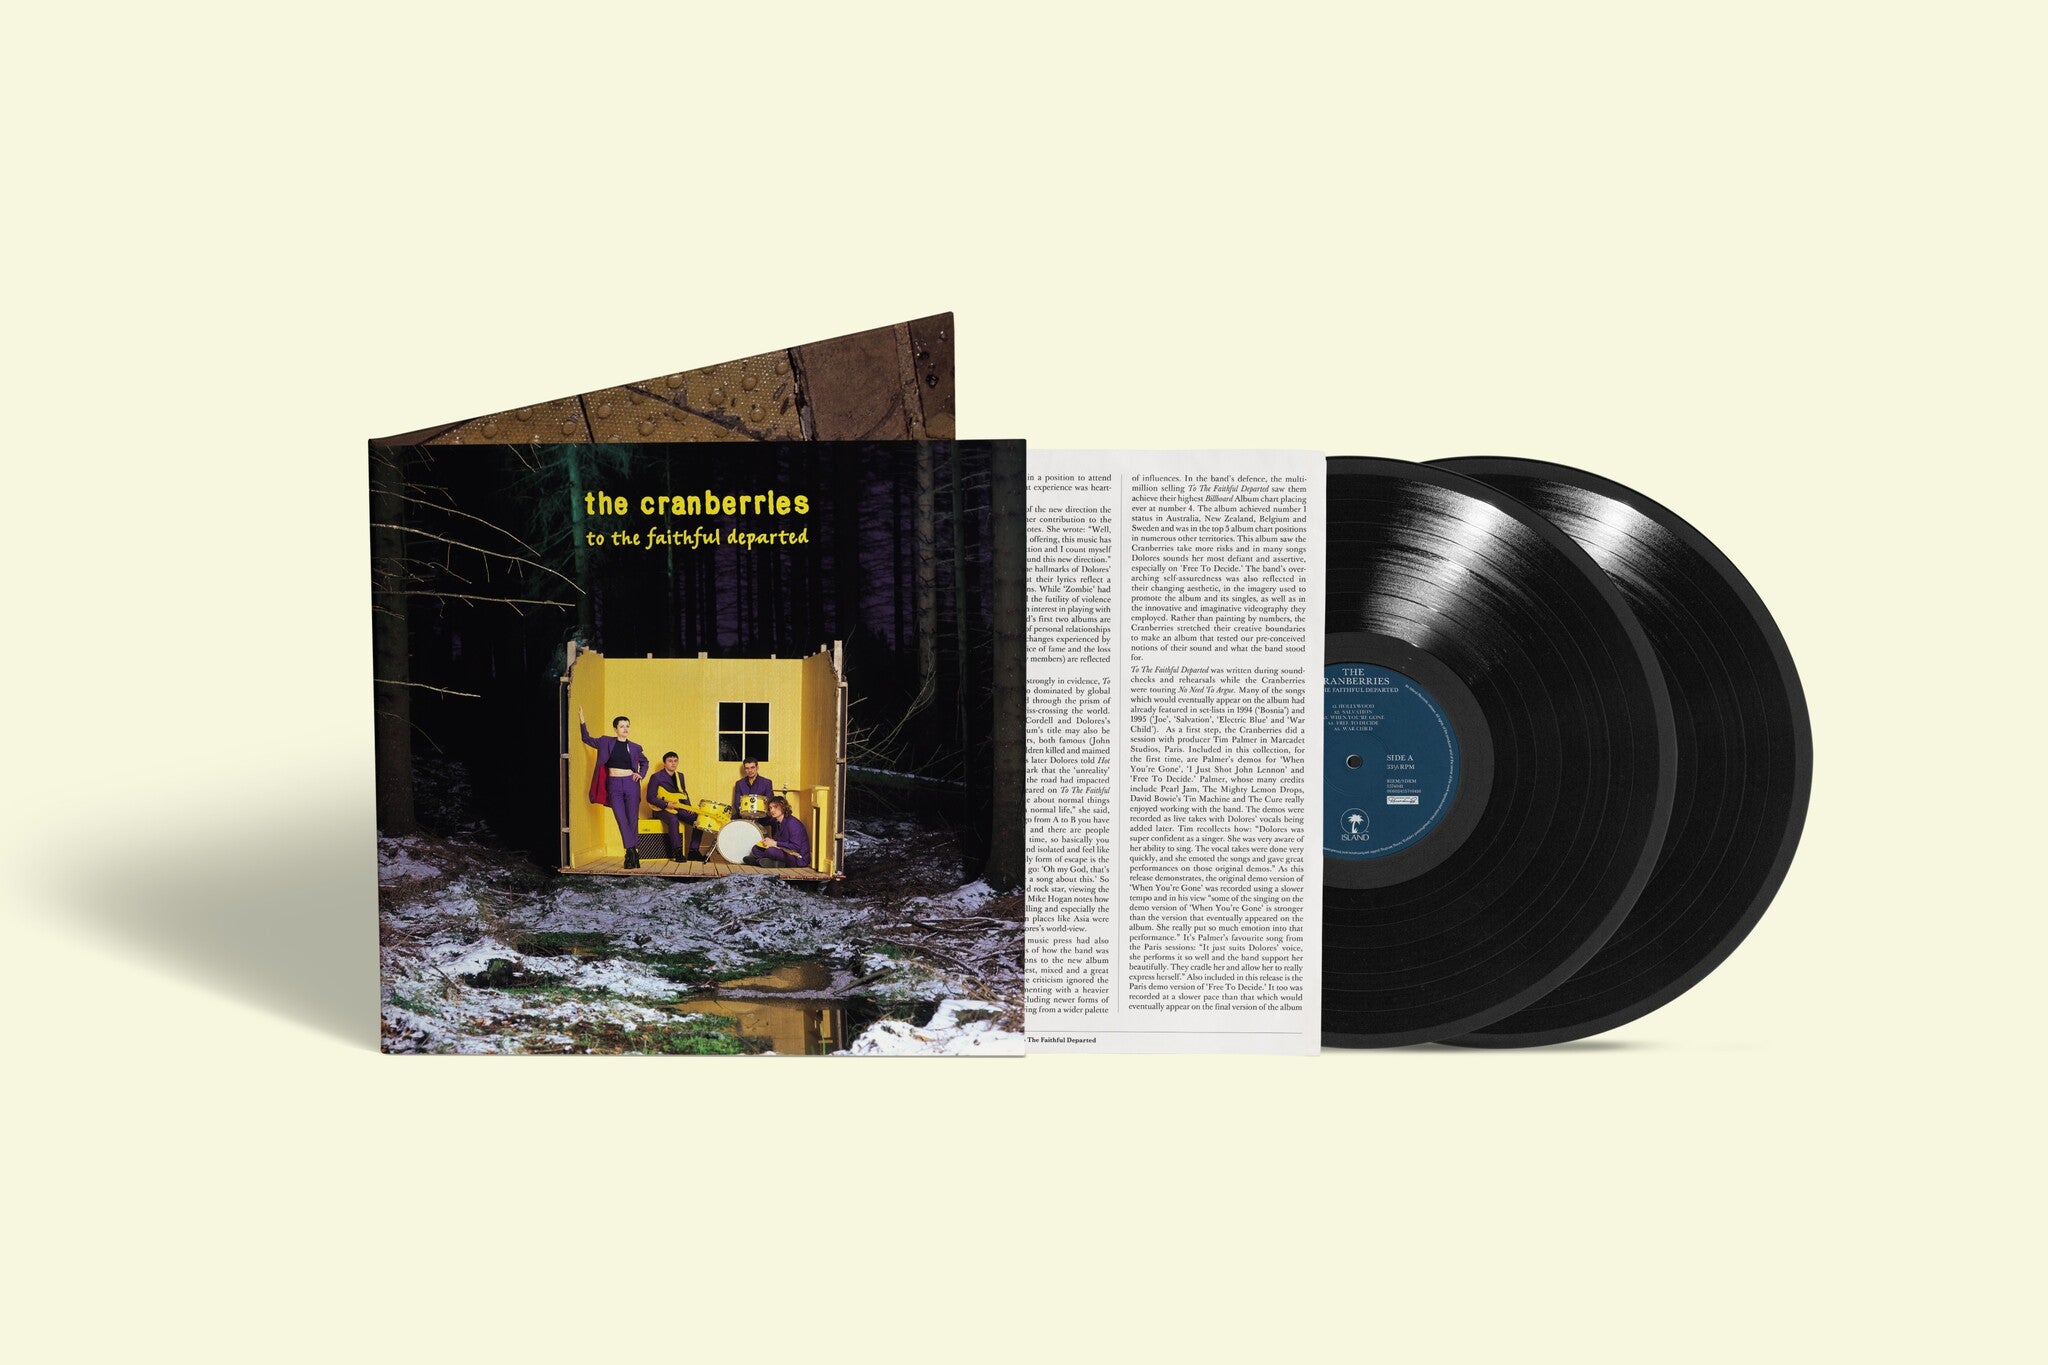 THE CRANBERRIES - To The Faithful Departed (2023 Deluxe Remastered & Expanded Edition) - 2LP - Gatefold Black Vinyl [SEP 29]